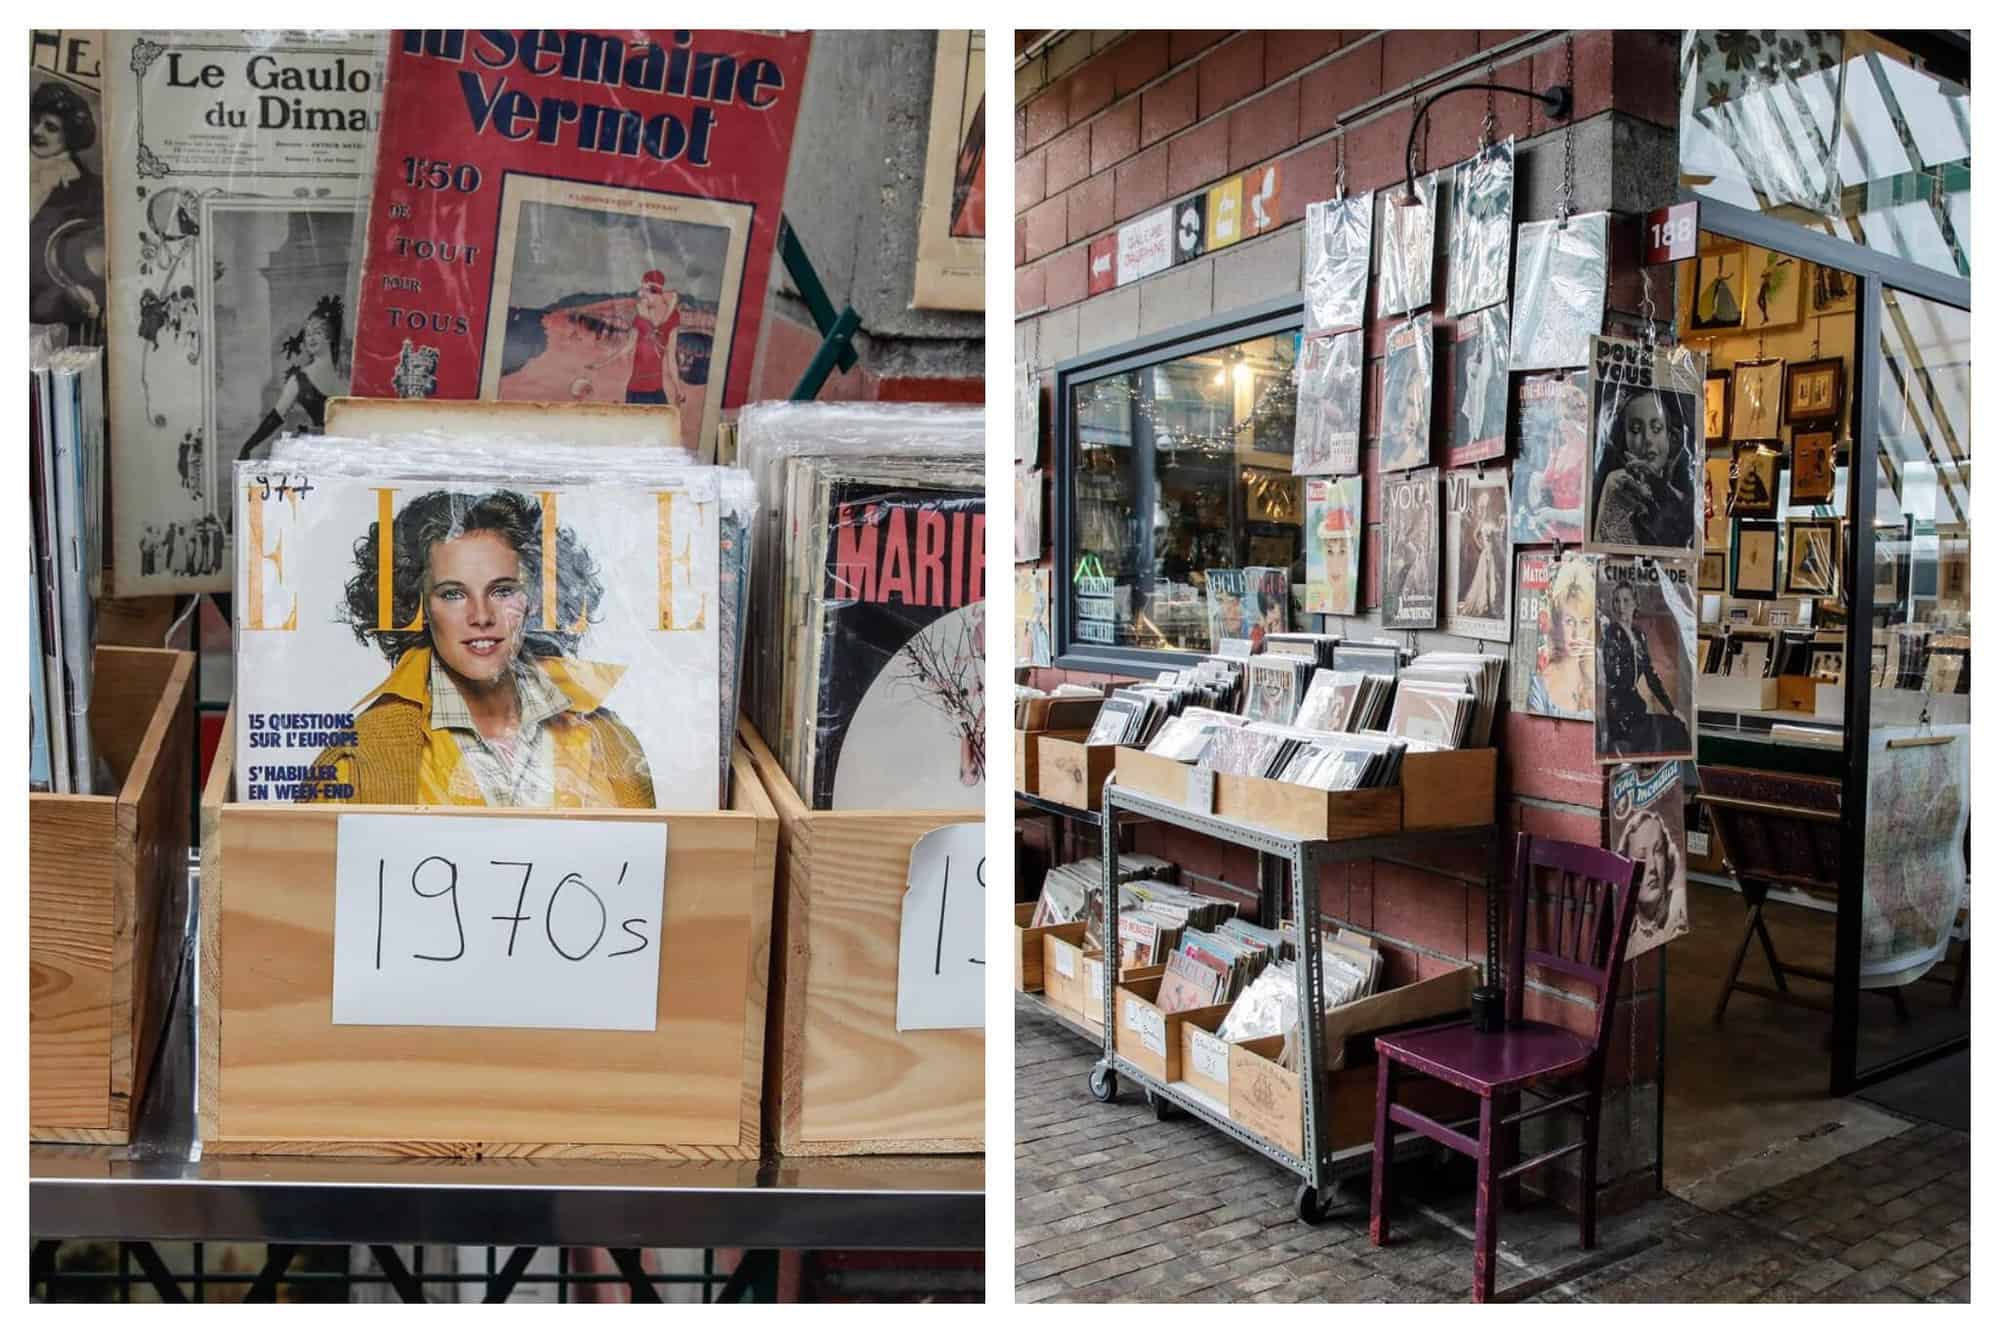 Left: Wooden boxes of vintage Elle magazines from the 1970's at Les Puces. Right: A photo of a corner of a flea market store that sells vinyls at Les Puces. Many can be seen in wooden stands in the photo